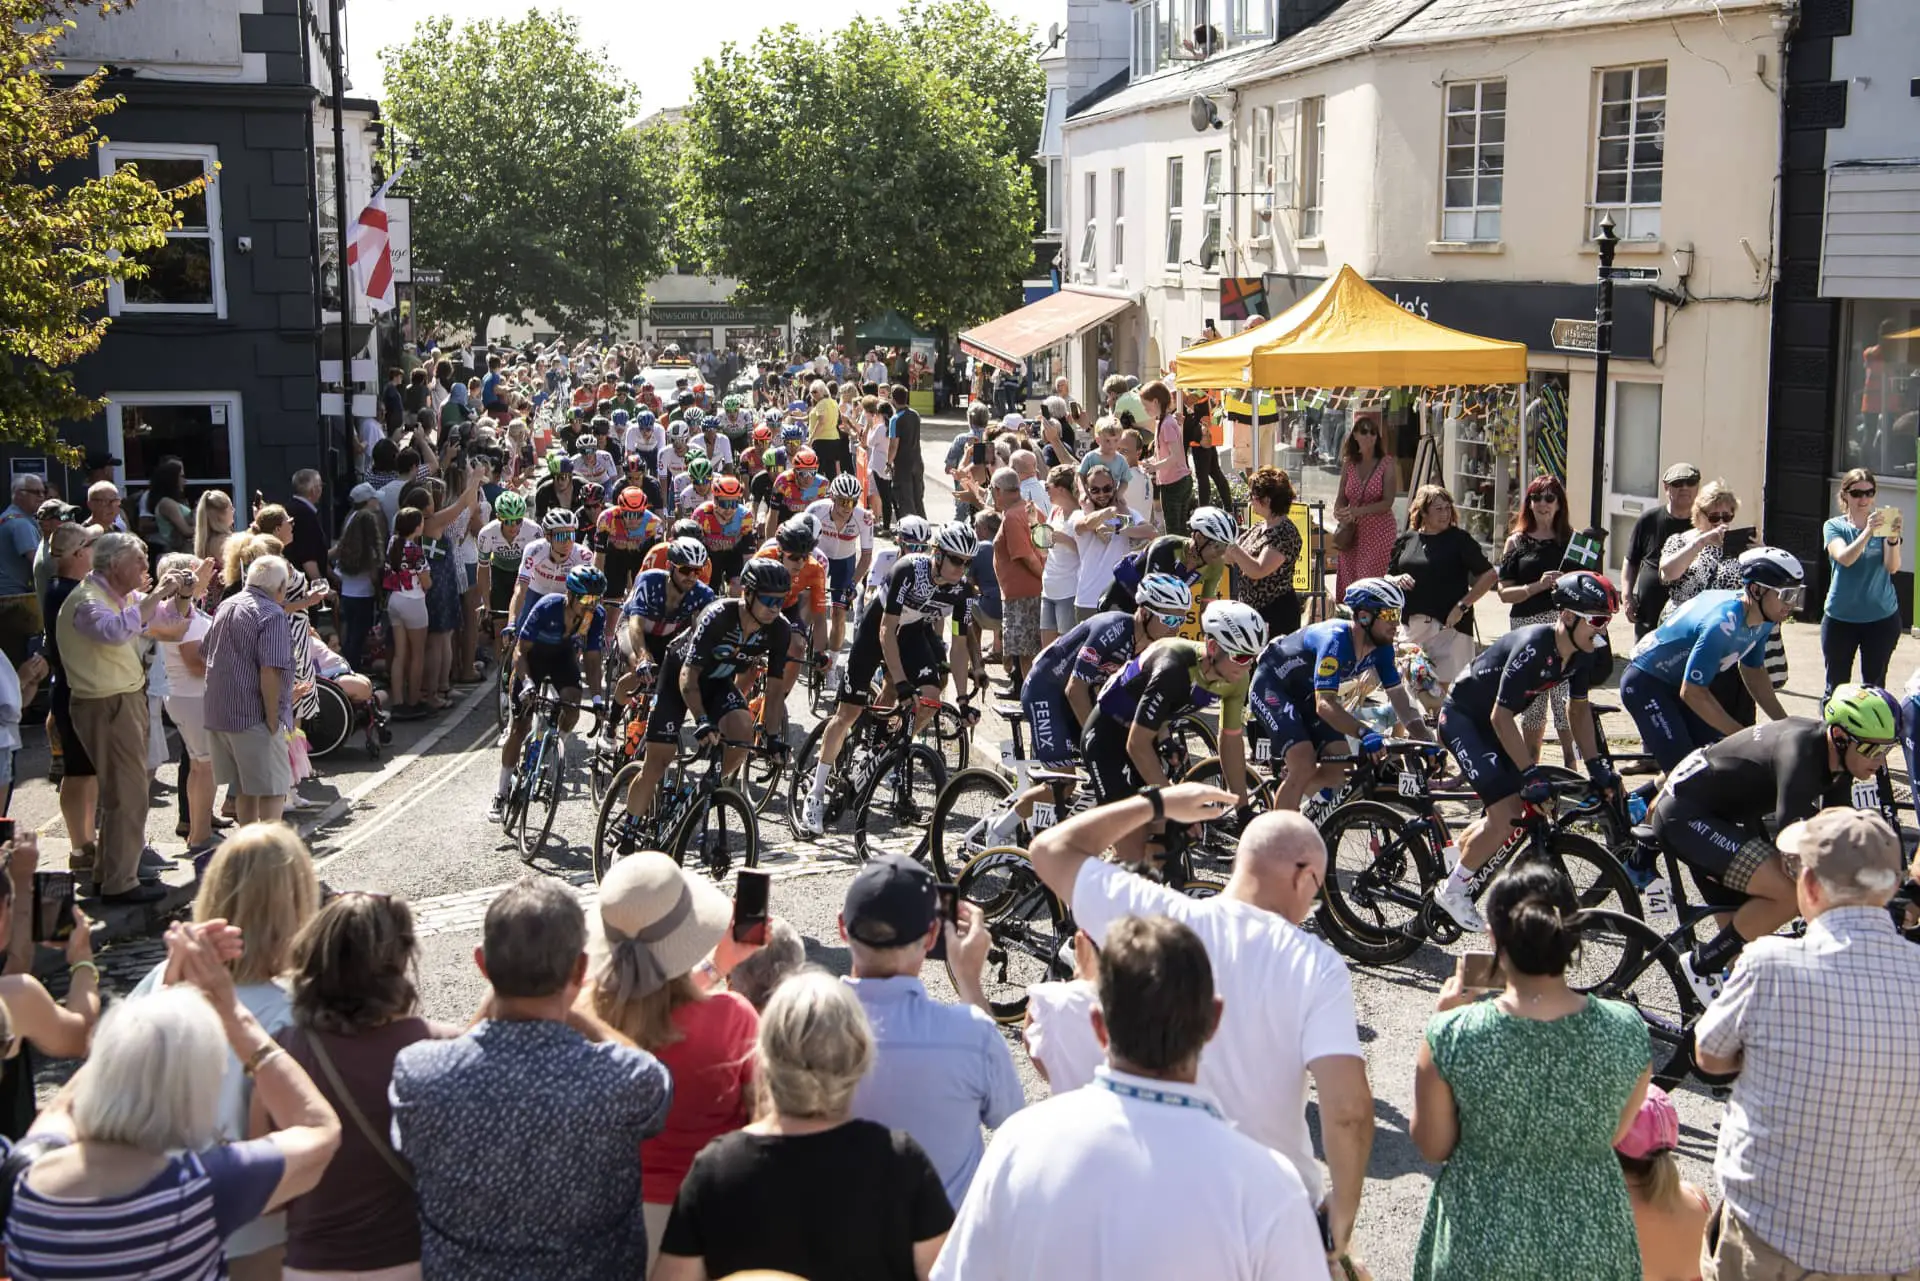 The 2021 Tour of Britain passes through crowds in the south west of England